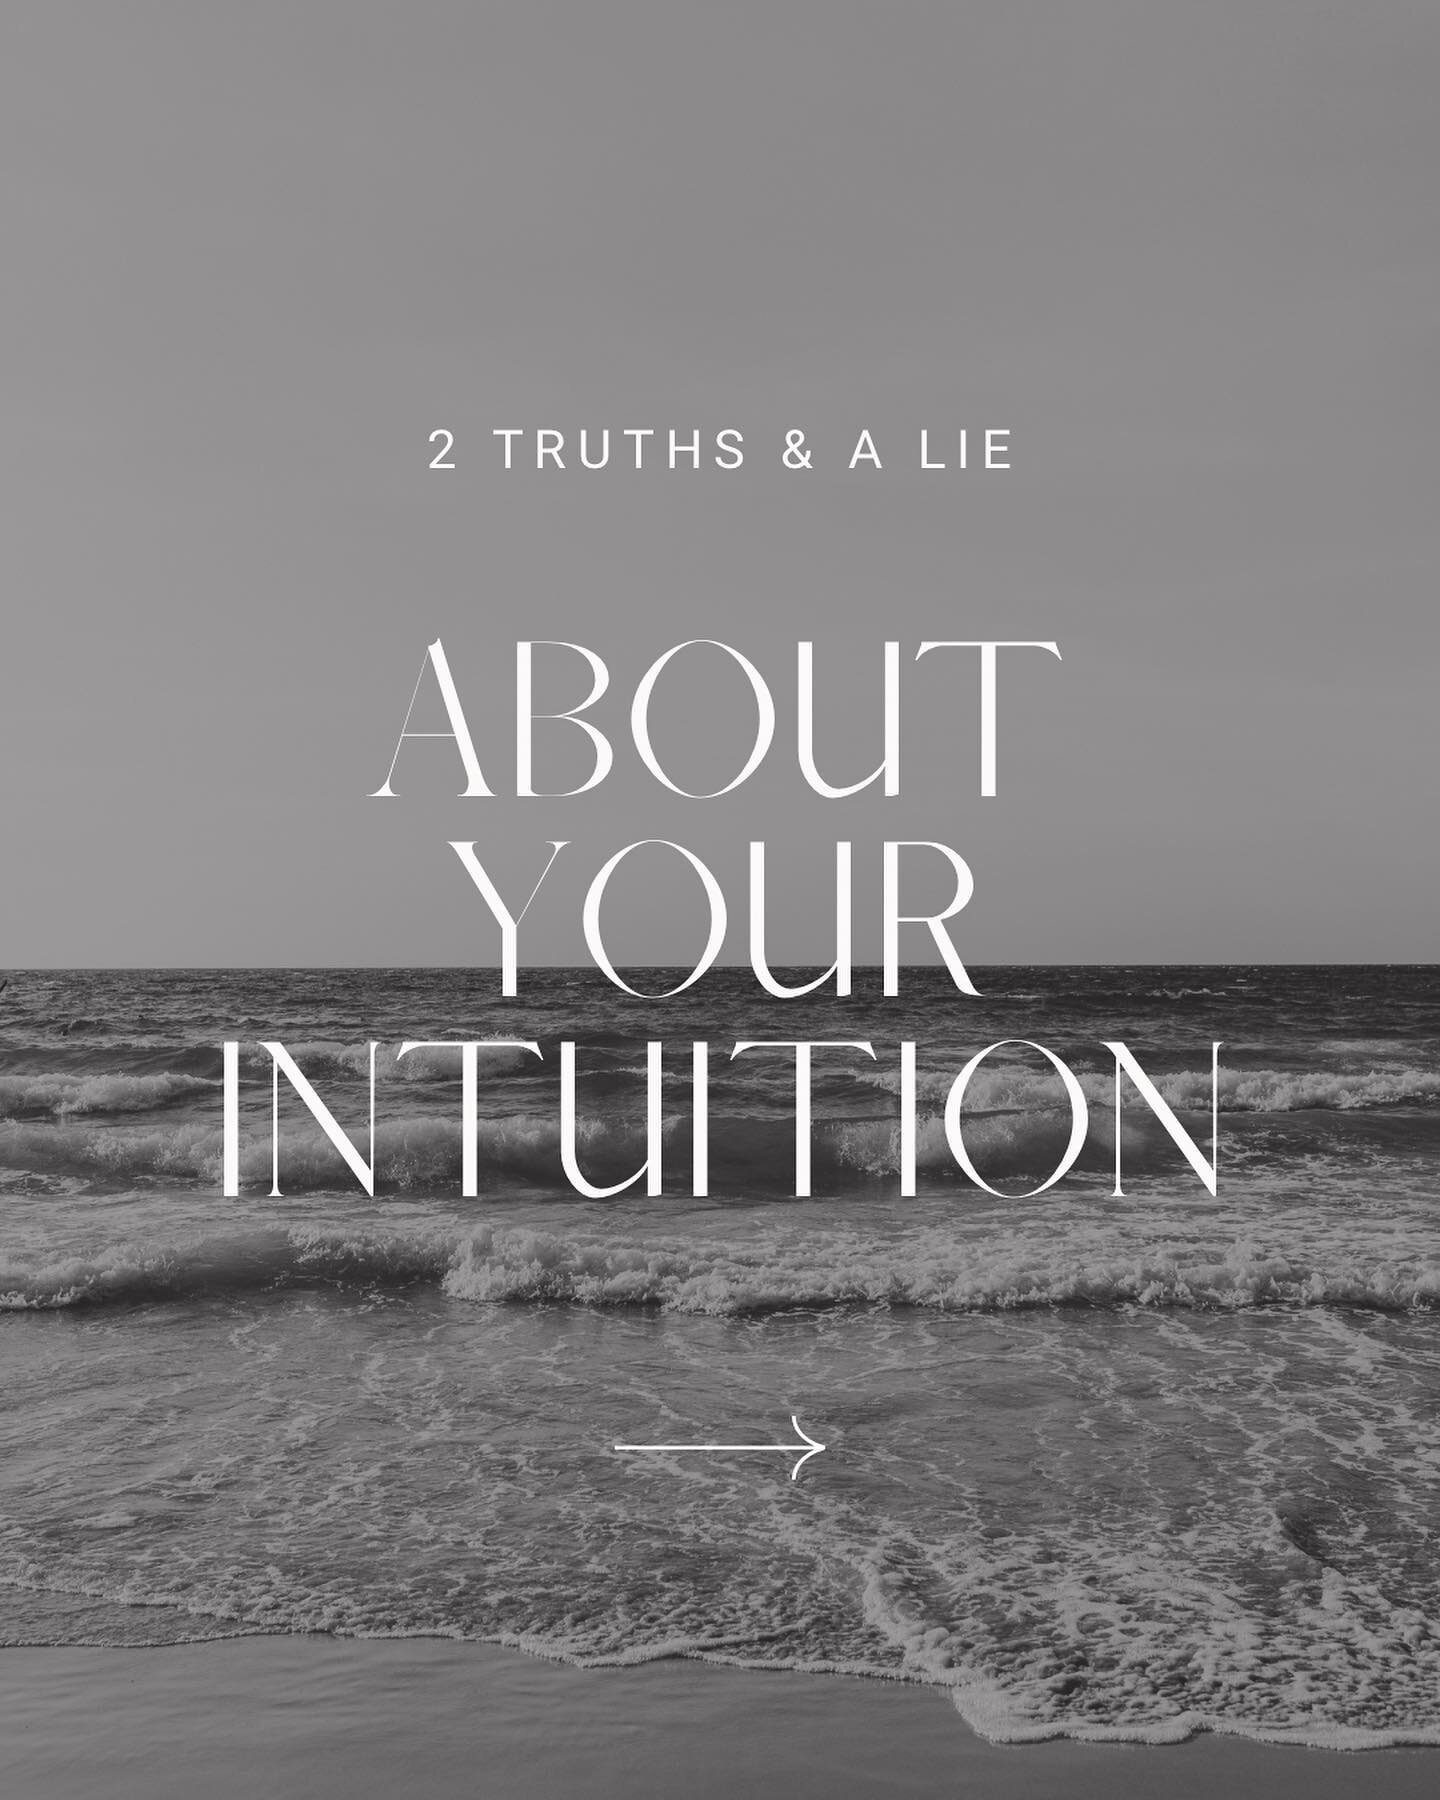 2022 was ALL about getting to know my intuition. 

The process was scary AF, but led to one of the most amazing discoveries I&rsquo;ve ever made about myself. 💃🏻

I used to be completely lost when it came to understanding my intuition.

It wasn&rsq